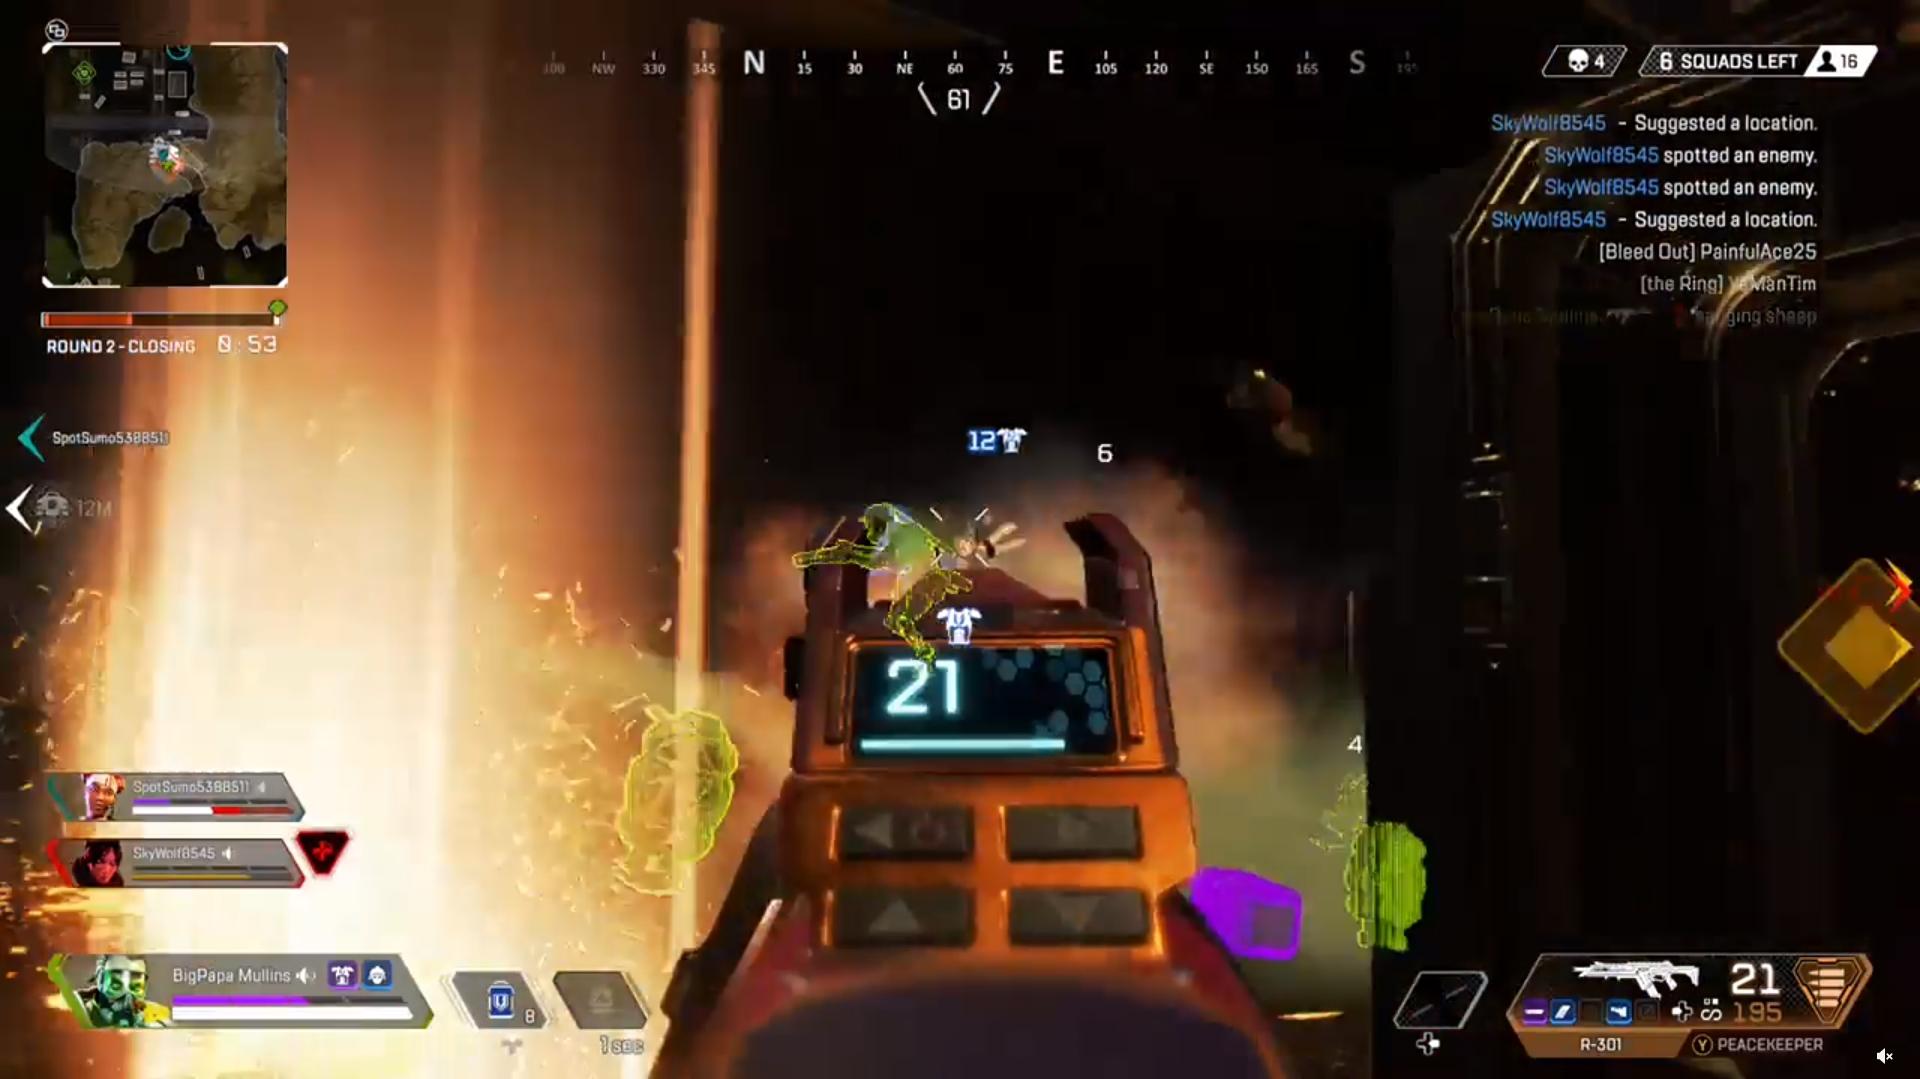 Octane trapped by Thermites and Caustic Nox gas in Apex Legends